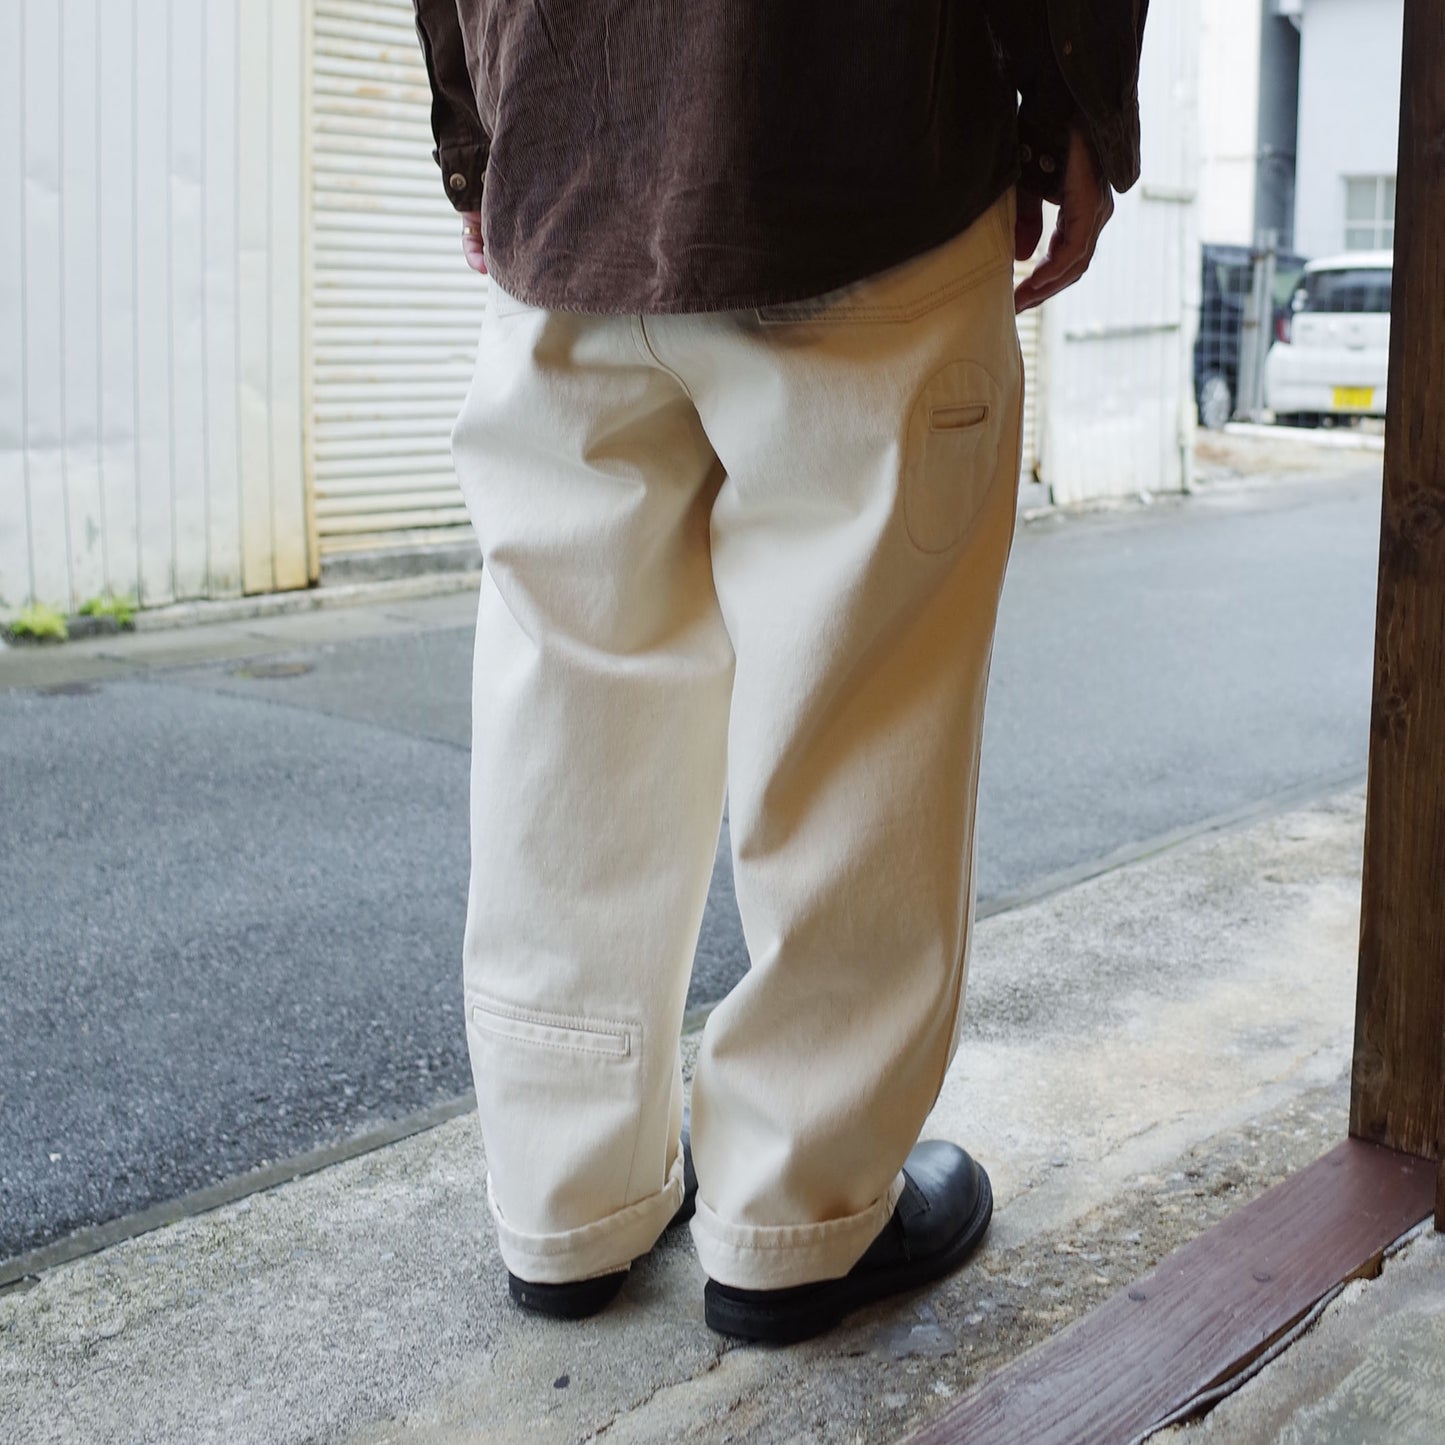 gourmet jeans "RIVATED" / グルメジーンズ "リベット"